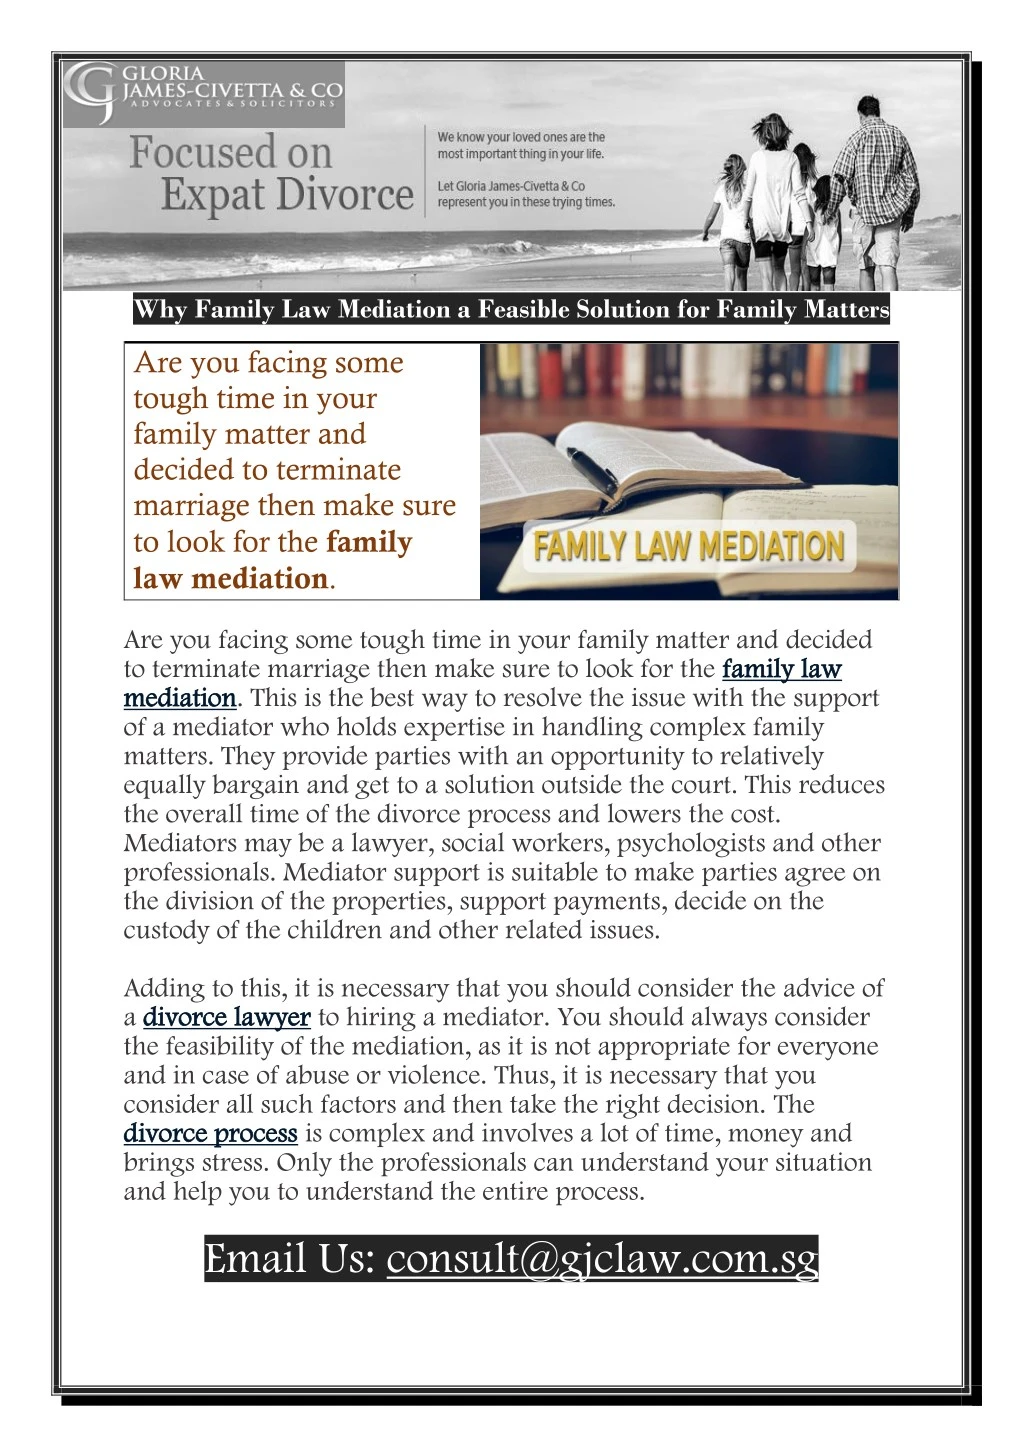 why family law mediation a feasible solution